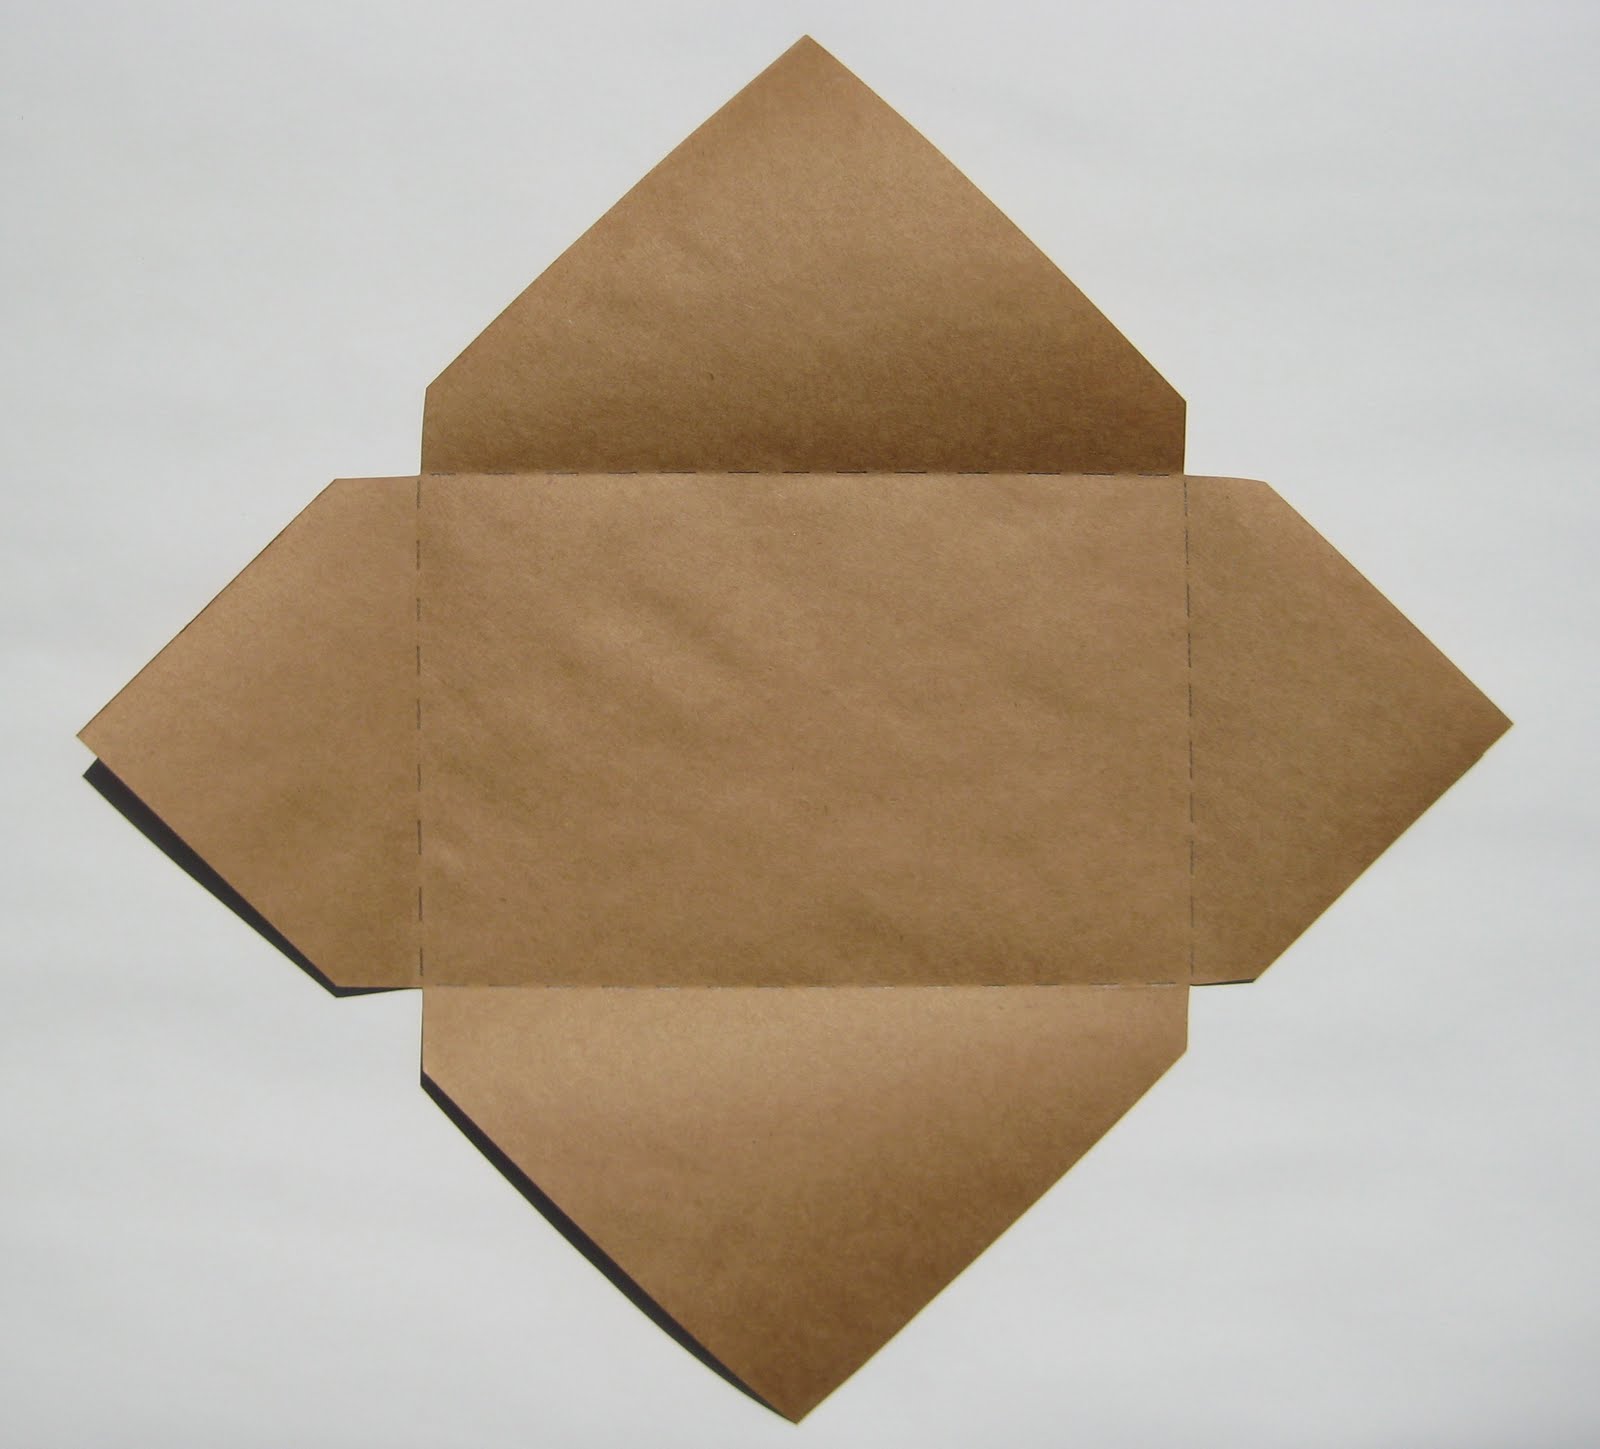 How To Make A Homemade Envelope For A Birthday Card